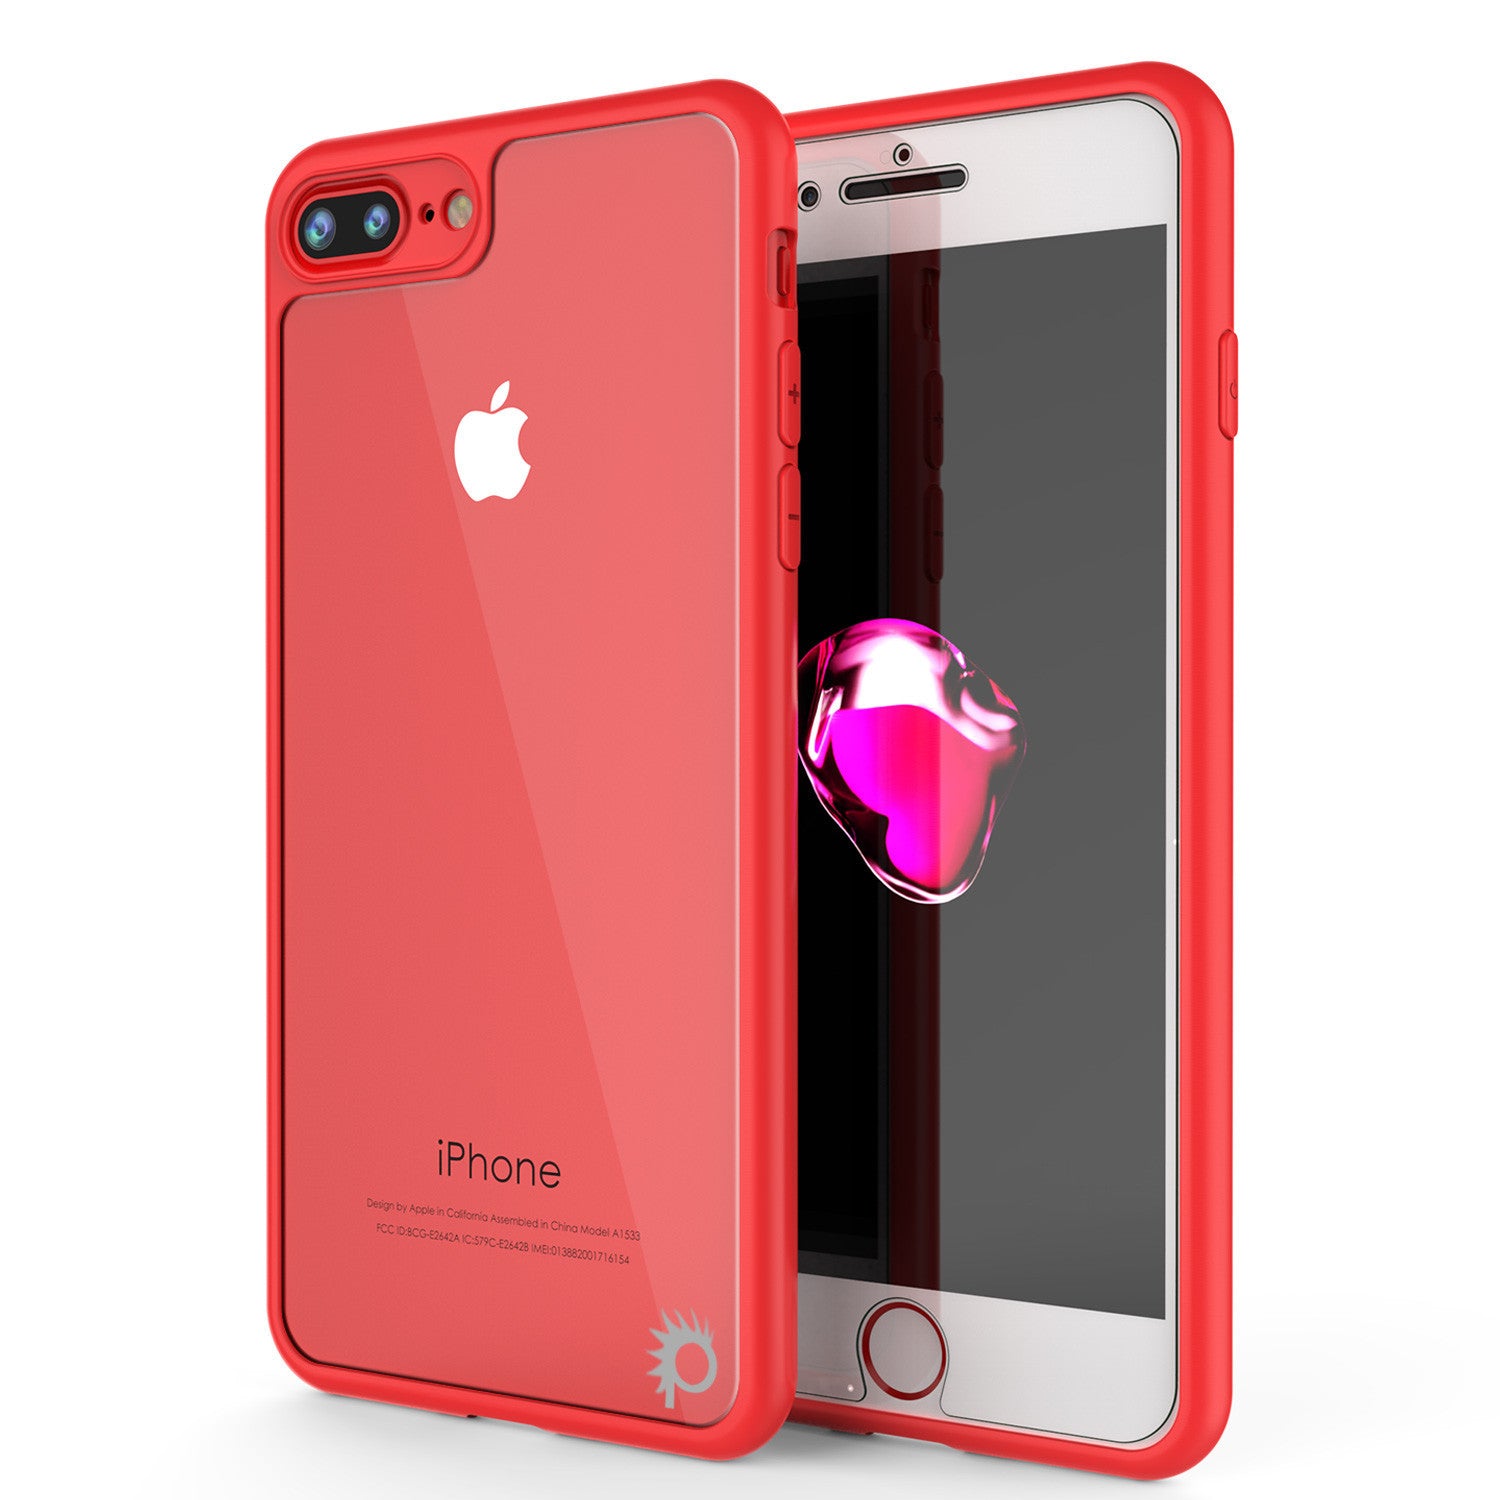 iPhone 7 PLUS Case [MASK Series] [RED] Full Body Hybrid Dual Layer TPU Cover W/ protective Tempered Glass Screen Protector (Color in image: red)